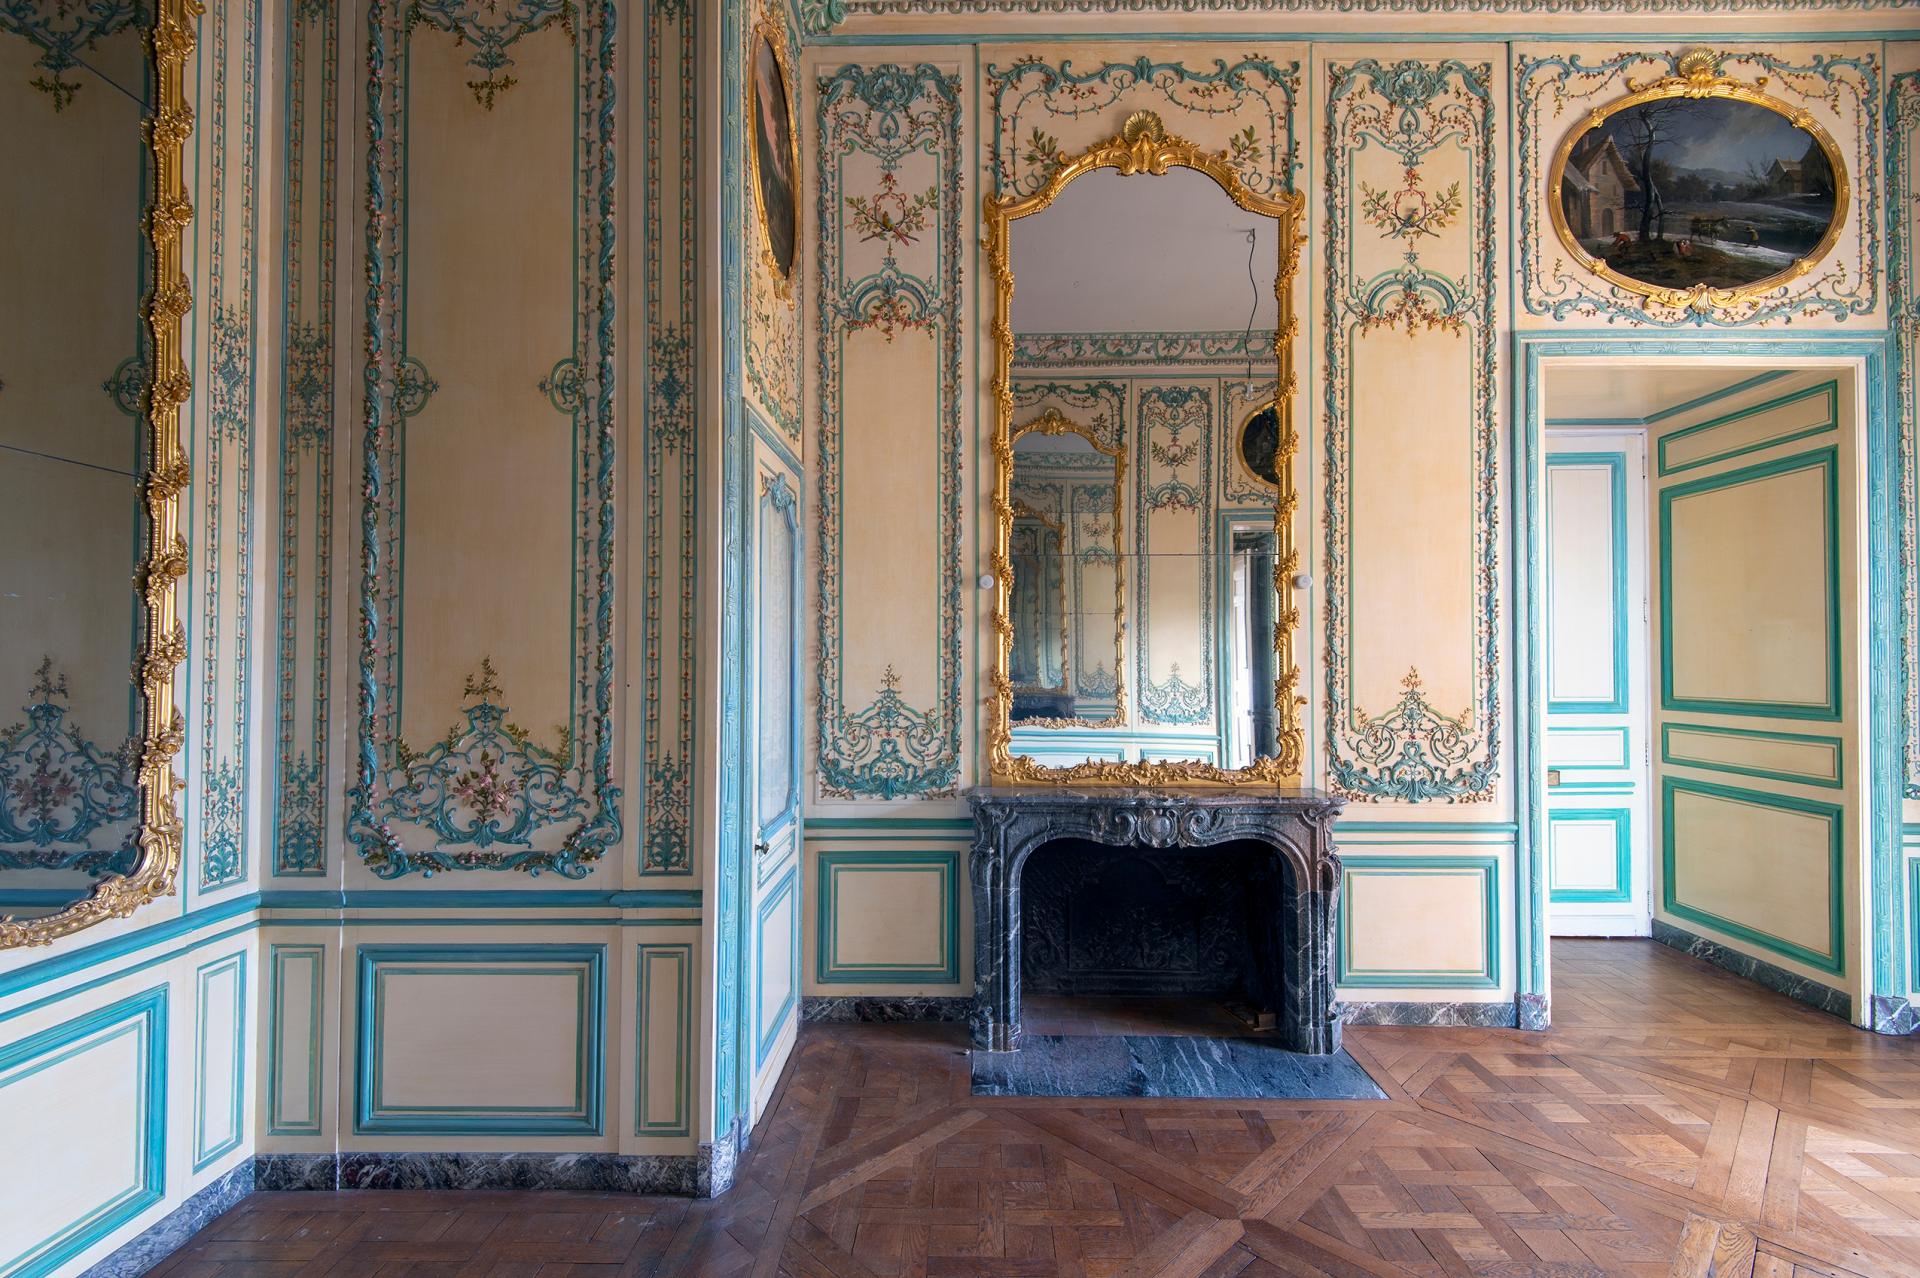 The Dauphin and the Dauphine’s apartments | Palace of Versailles